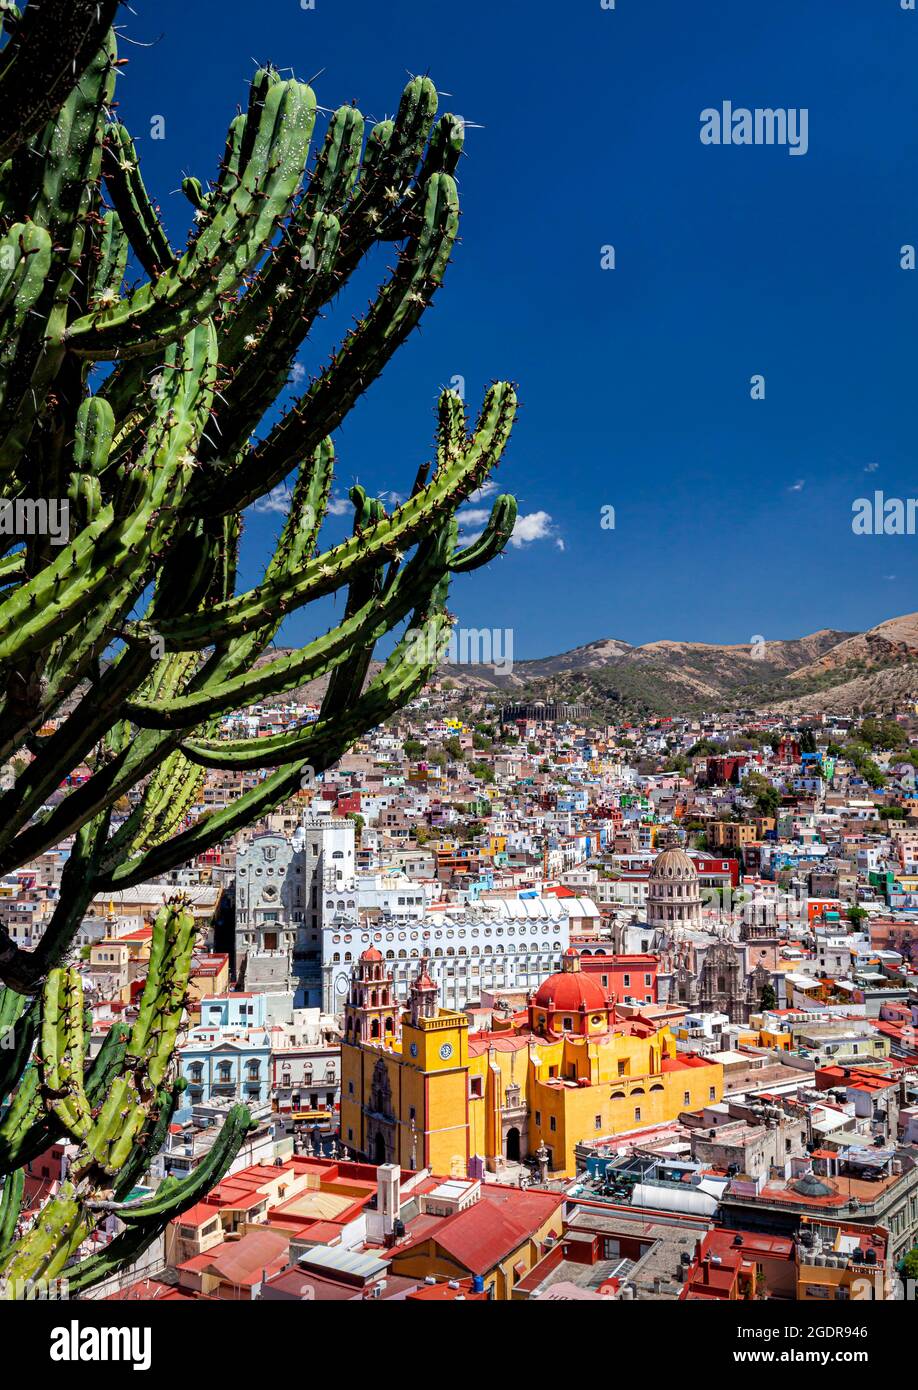 The cathedral and university in the historical downtown of colonial Guanajuato, Mexico. Stock Photo